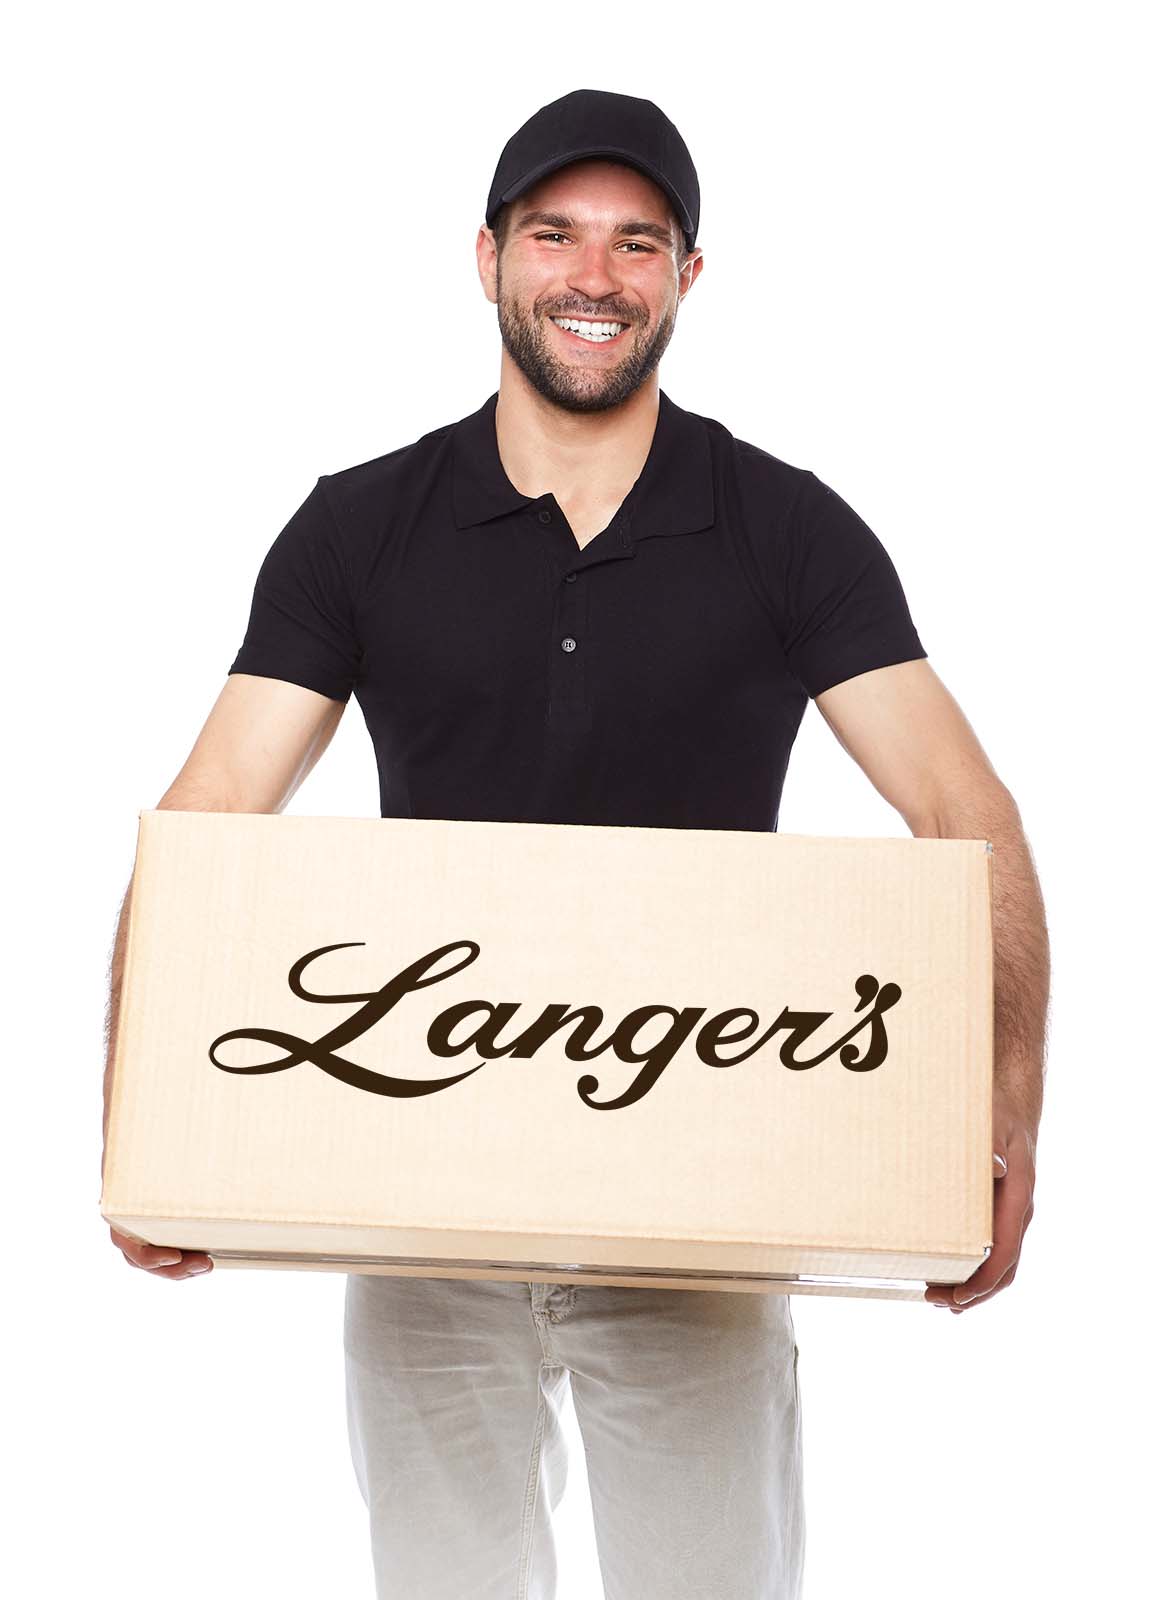 A delivery person carrying a box of Langer's food shipped overnight by Goldbelly